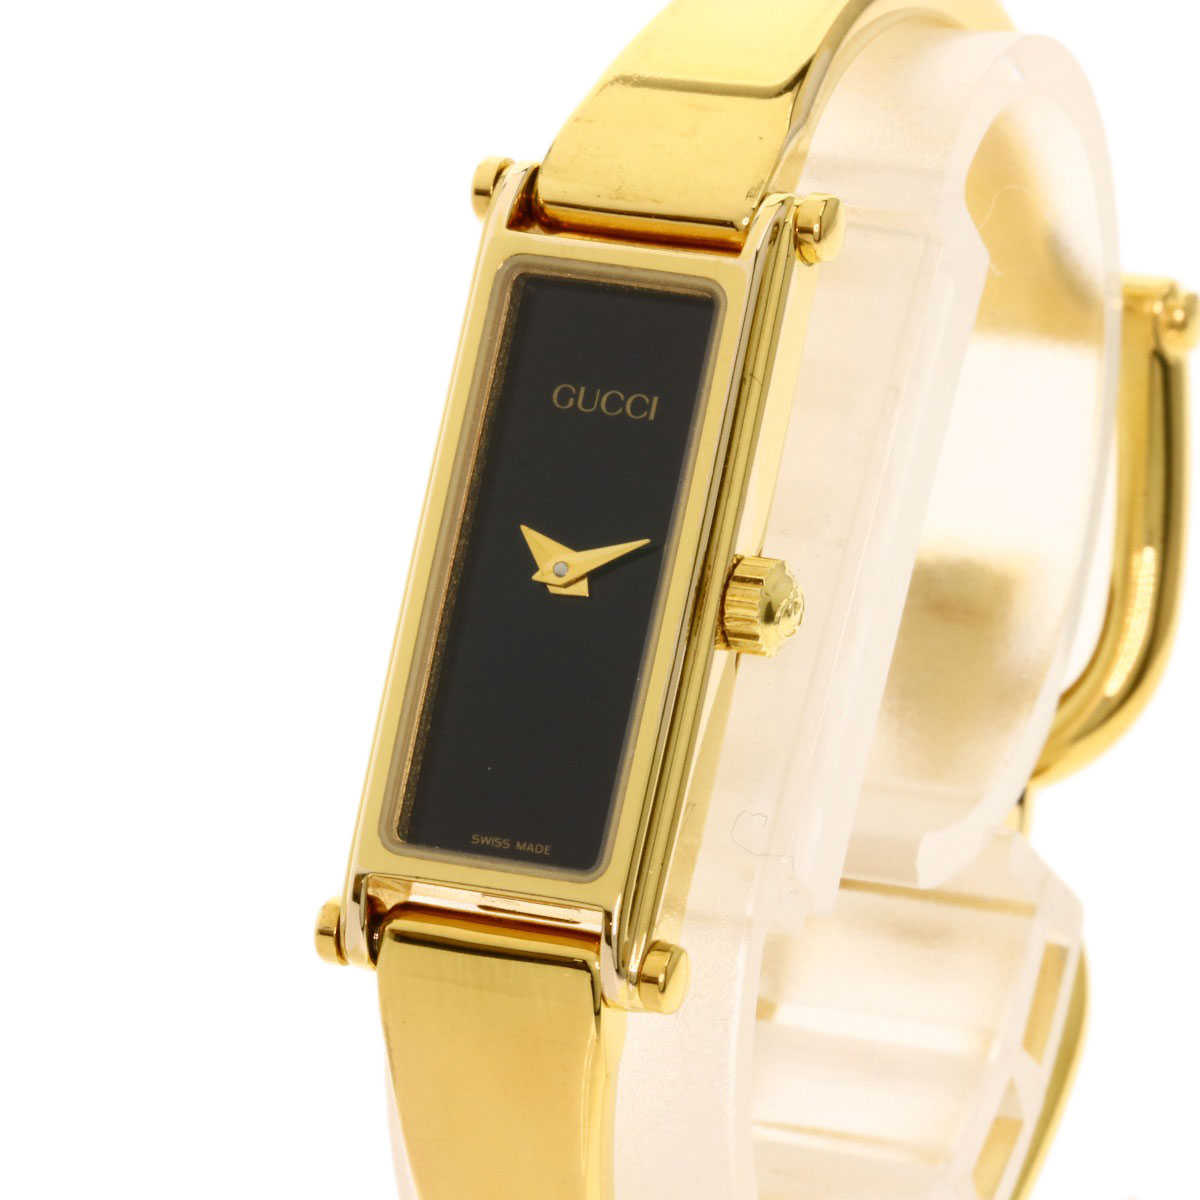 Gucci Bangle Watches 1500l Gold Platedgold Plated Ladies 731903342811